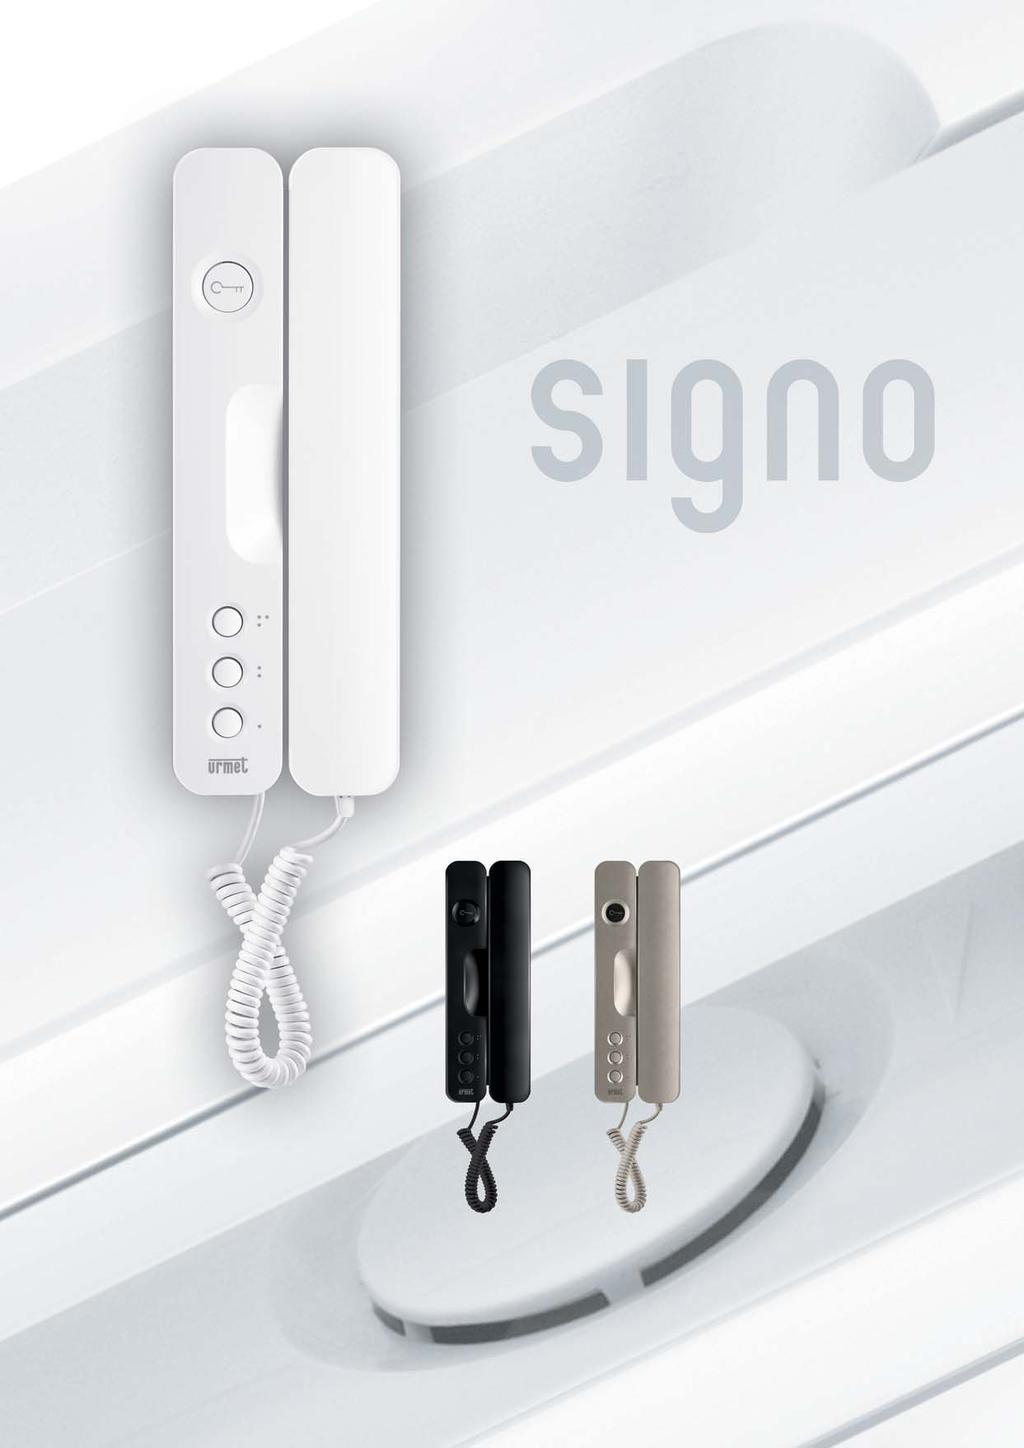 AUDIO A smooth surface: long, slim lines and minimum thickness: the Signo reinvents the door phone with a light,